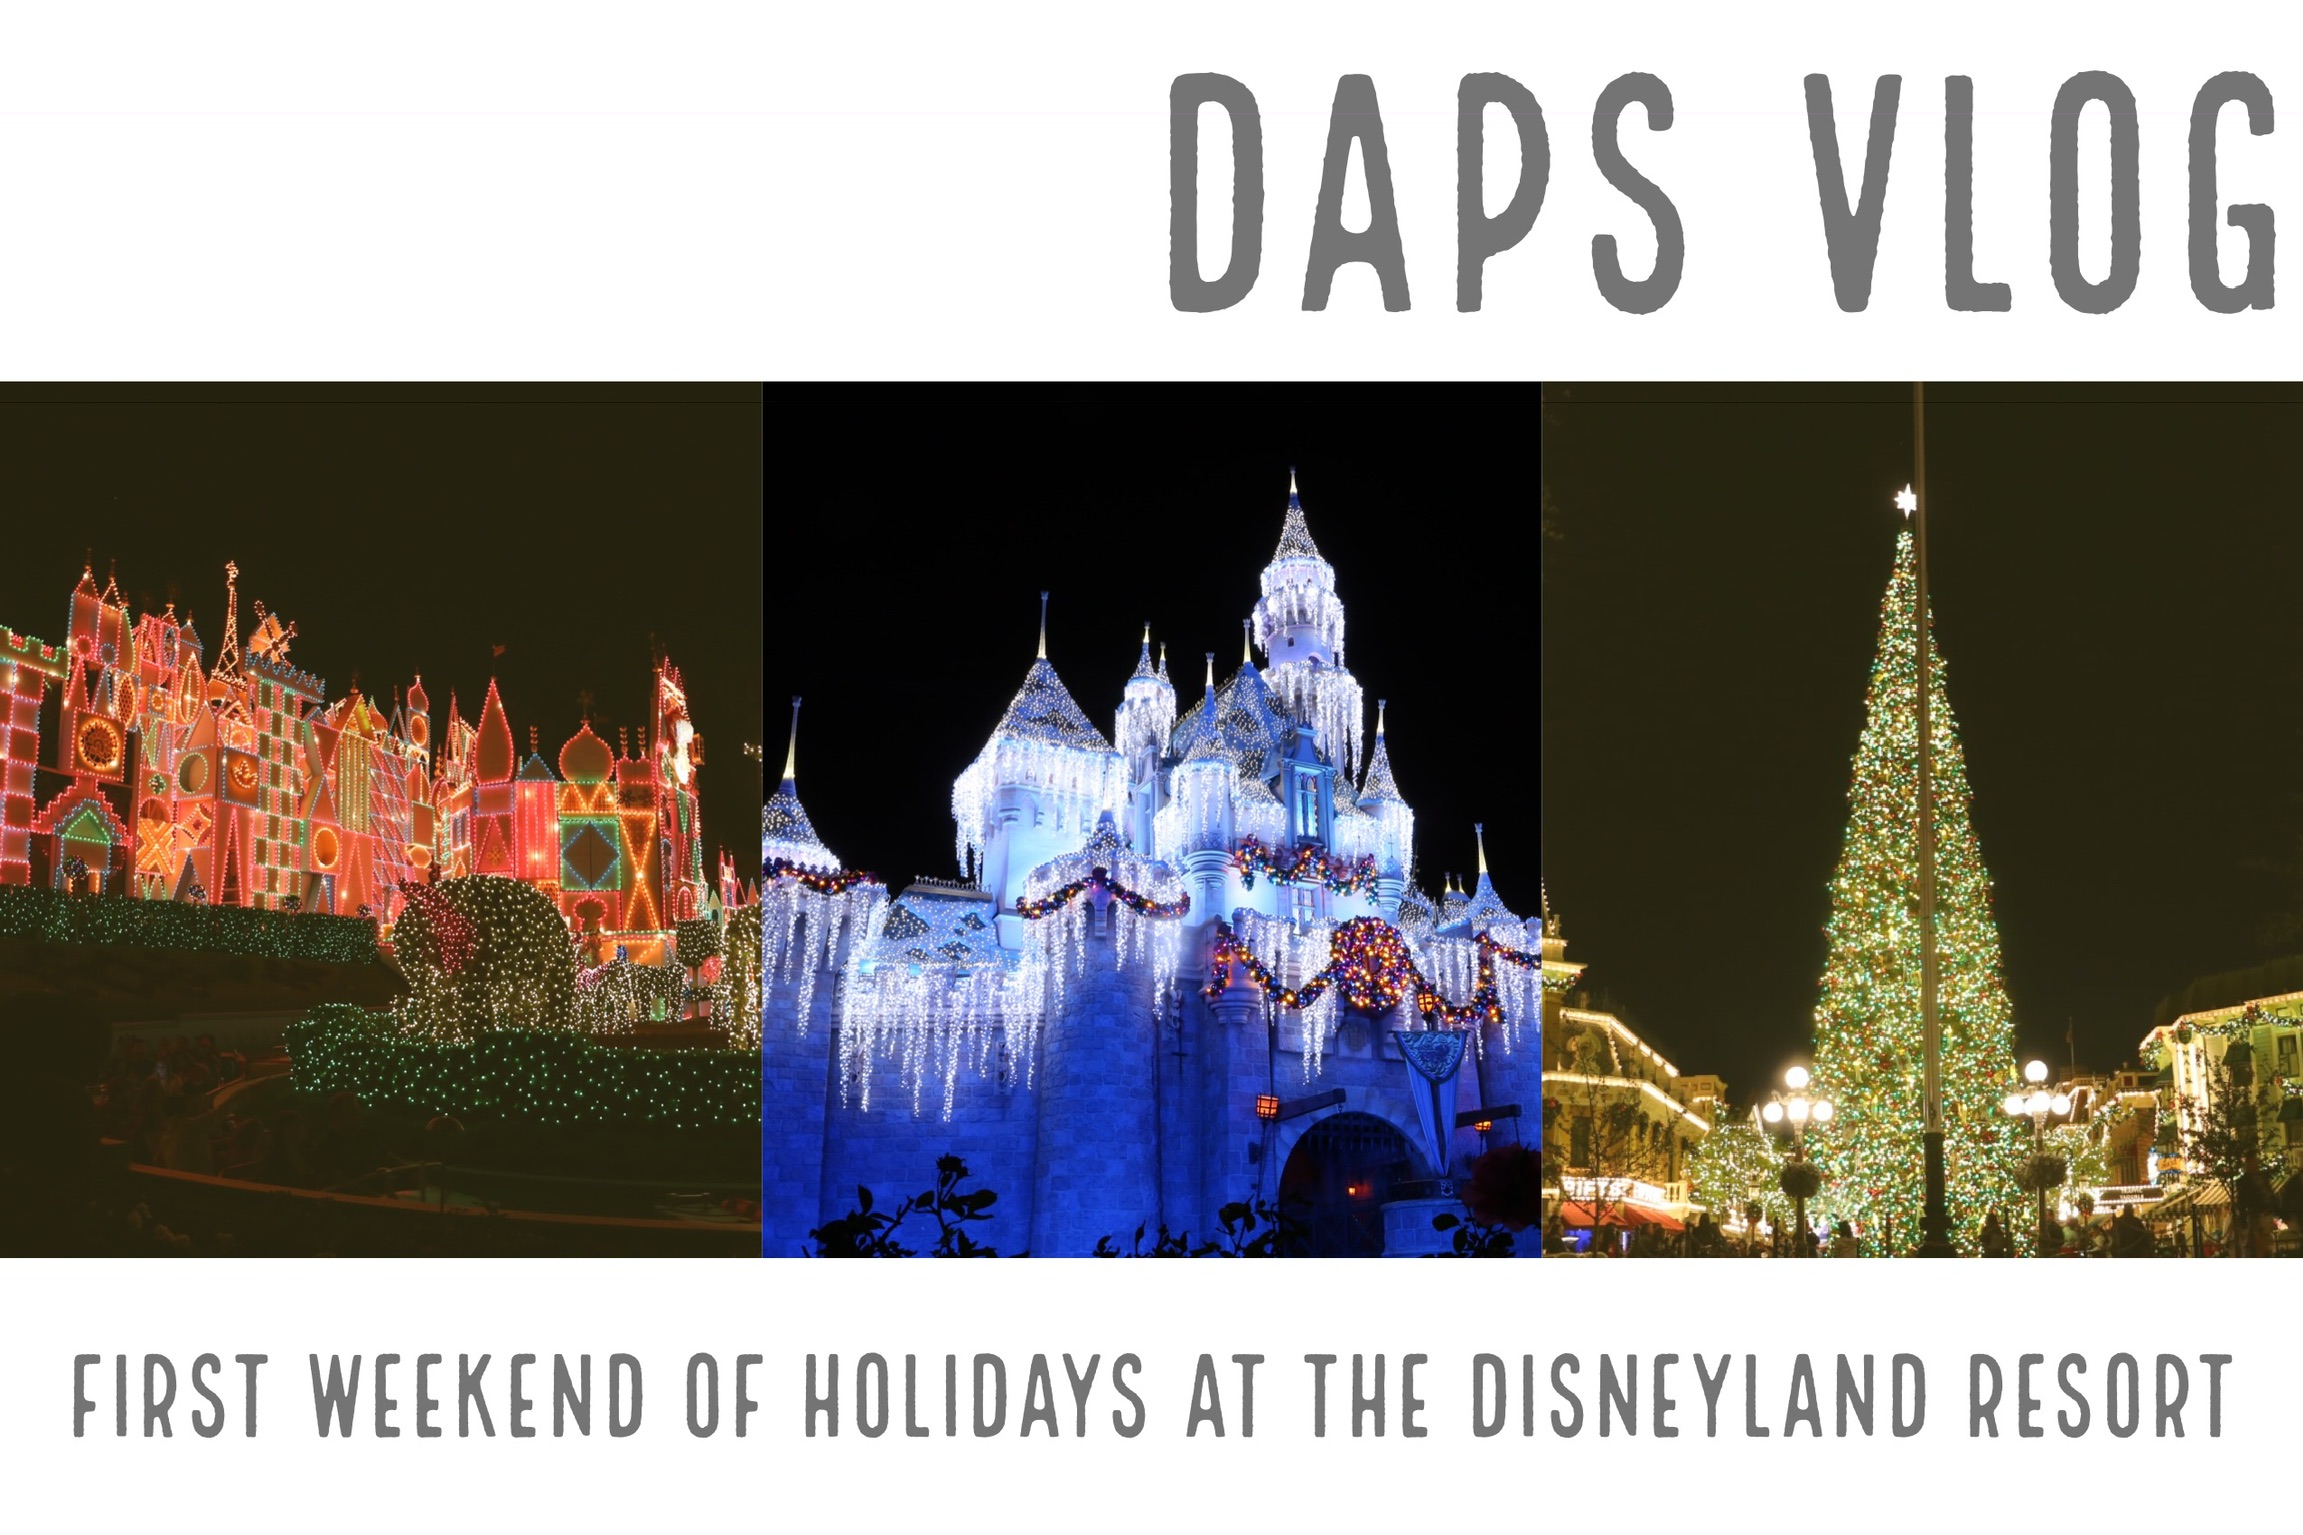 See the First Weekend of the Holidays at Disneyland Resort Through Our Eyes – DAPs VLOG